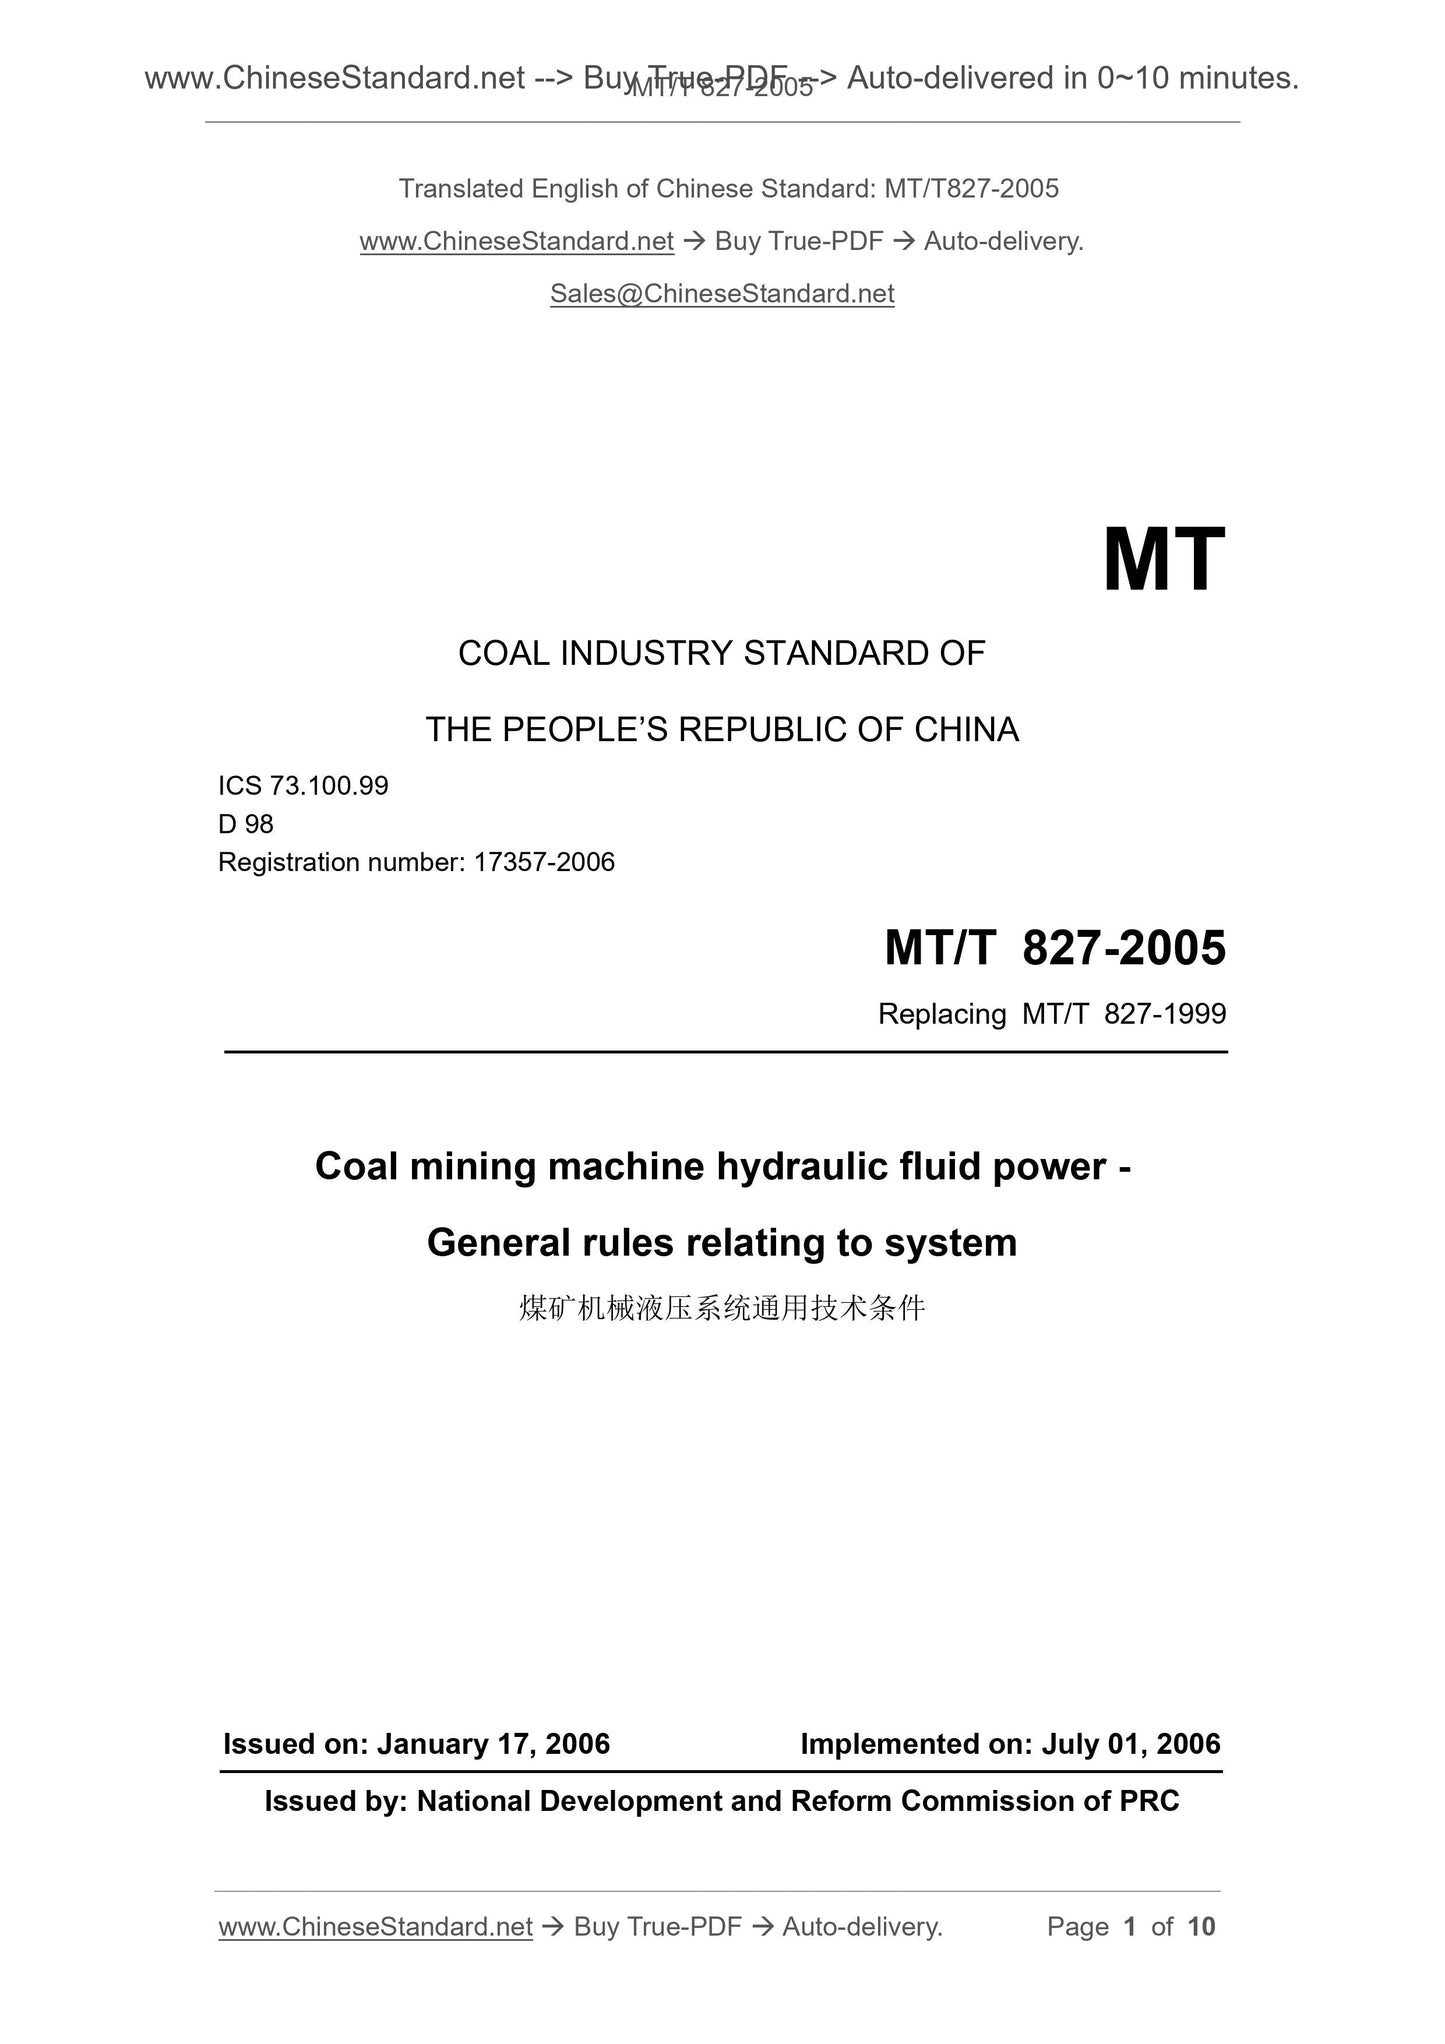 MT/T 827-2005 Page 1